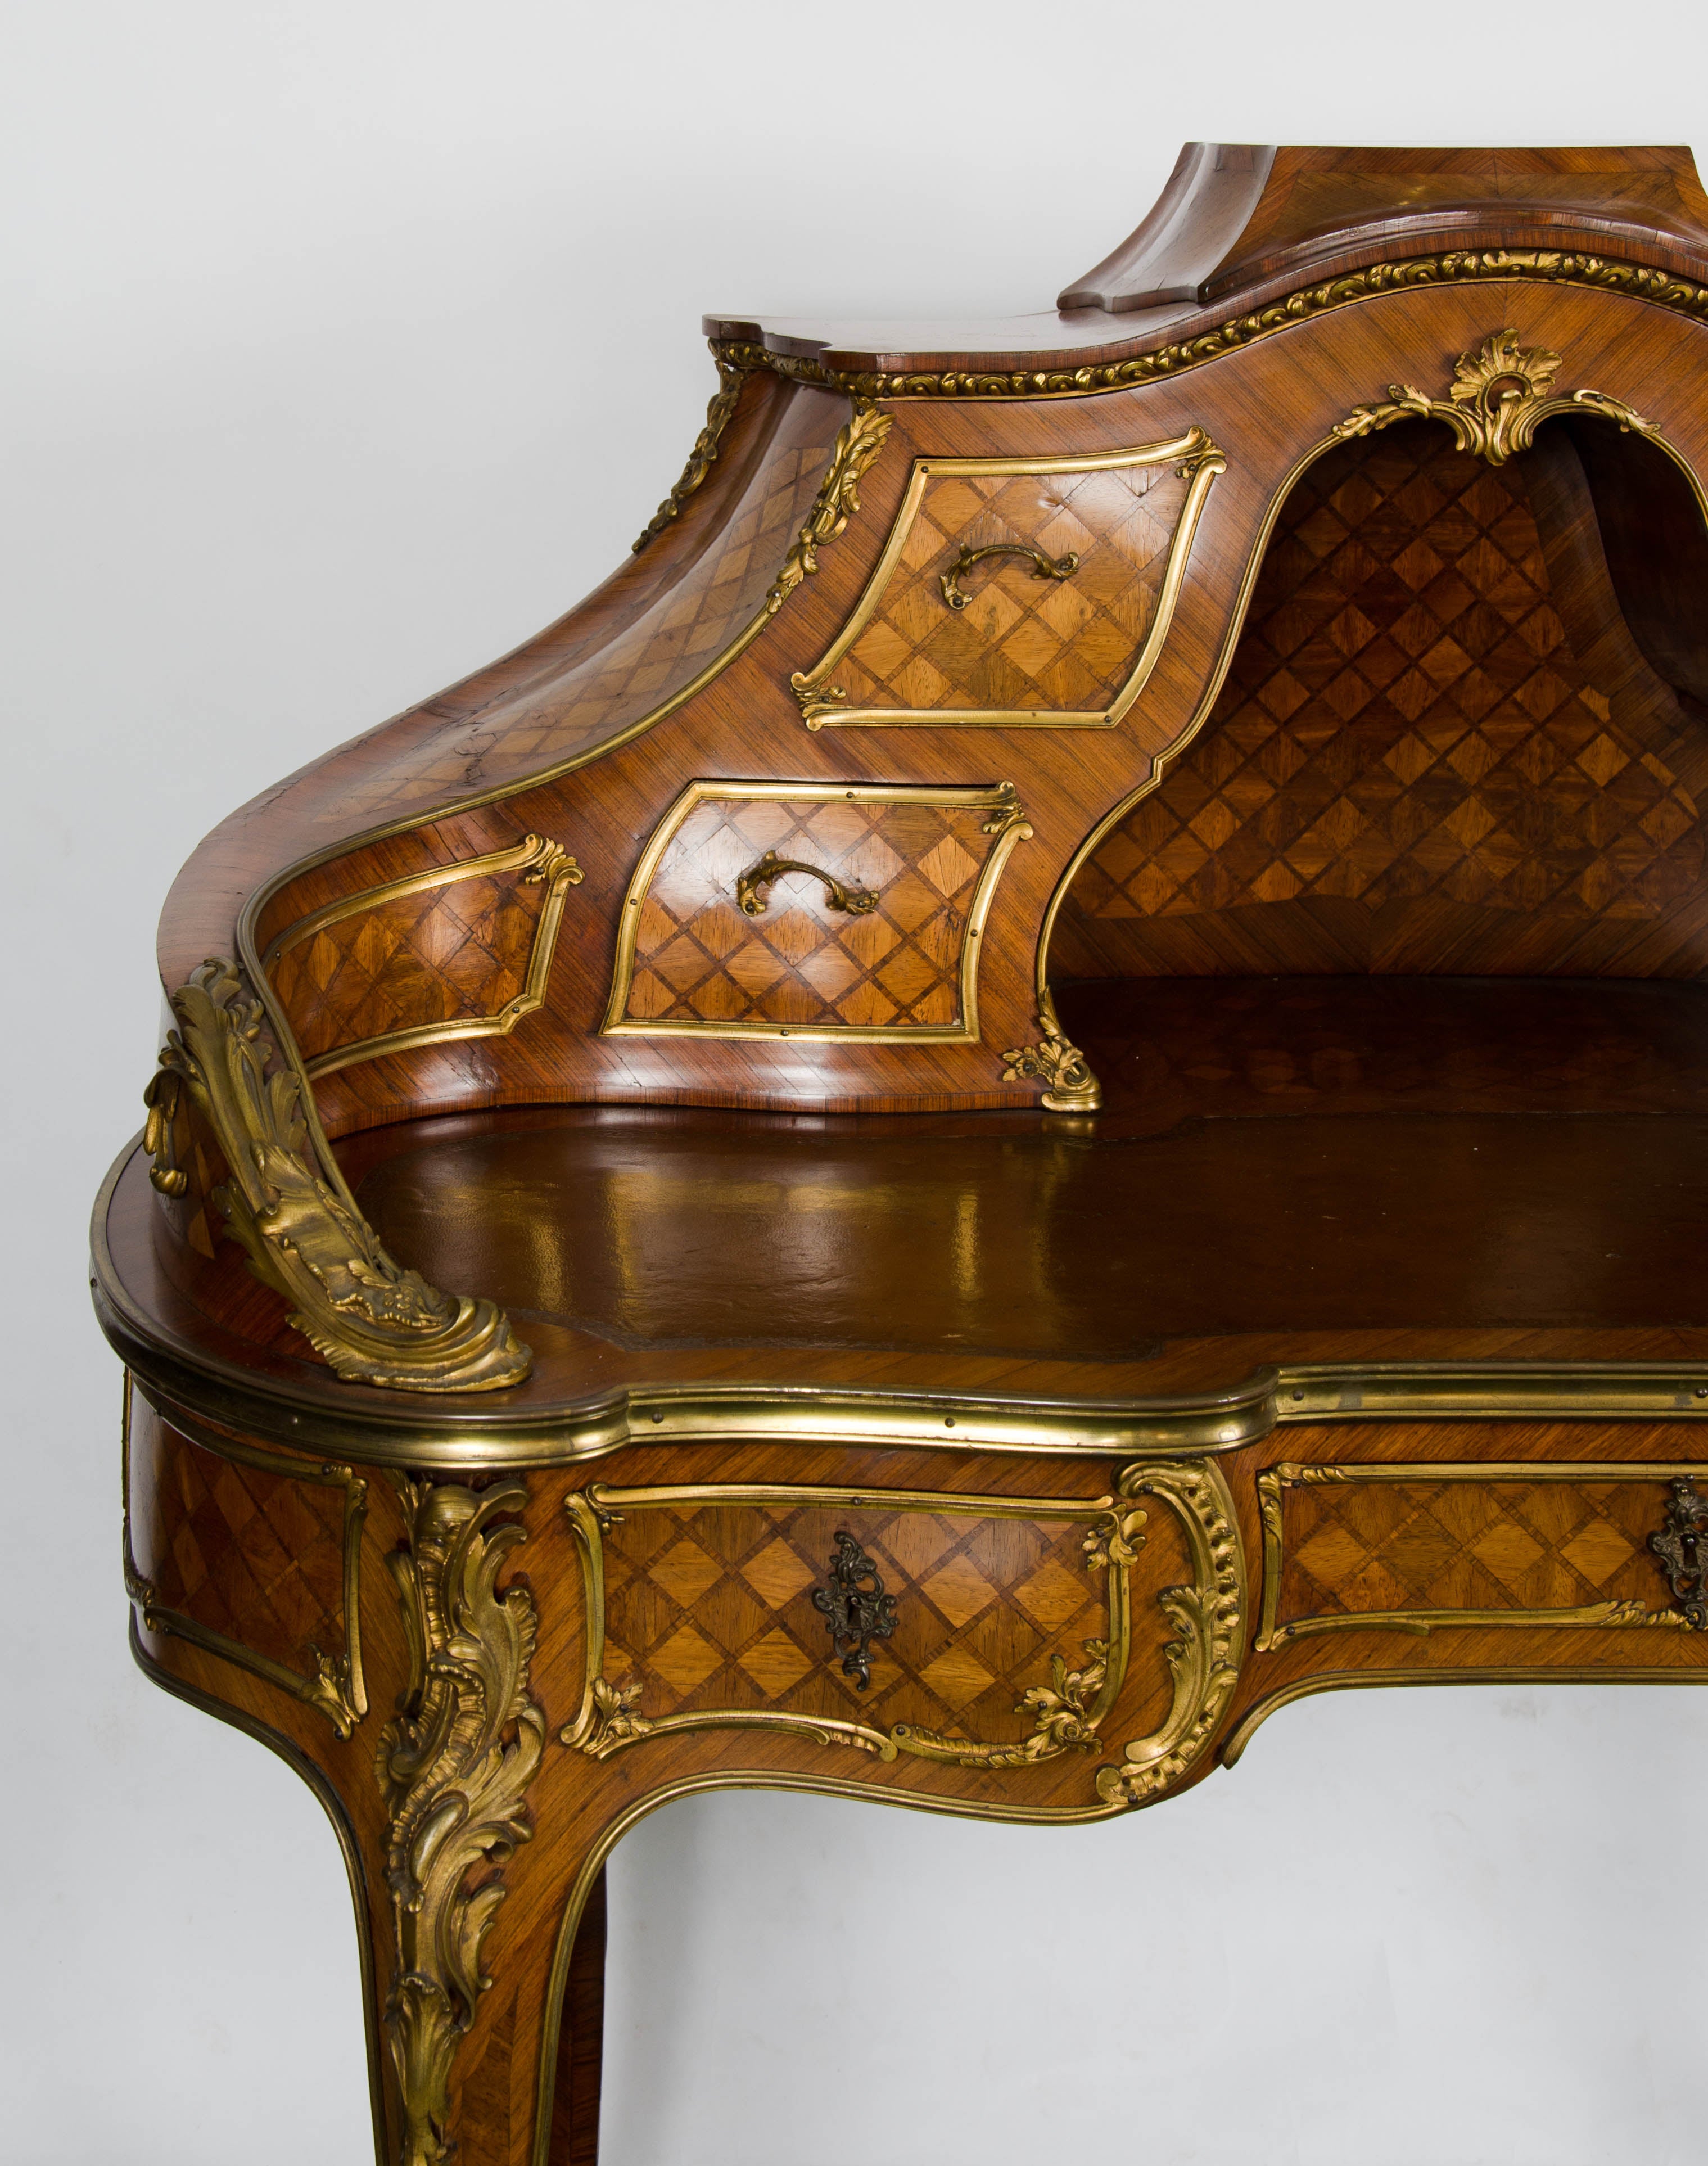 A very good quality French Louis XV style Kingwood, ormolu mounted bureau de dame with parquetry inlaid to the whole, various drawers to the top and frieze, inset leather top and raised on cabriole legs.